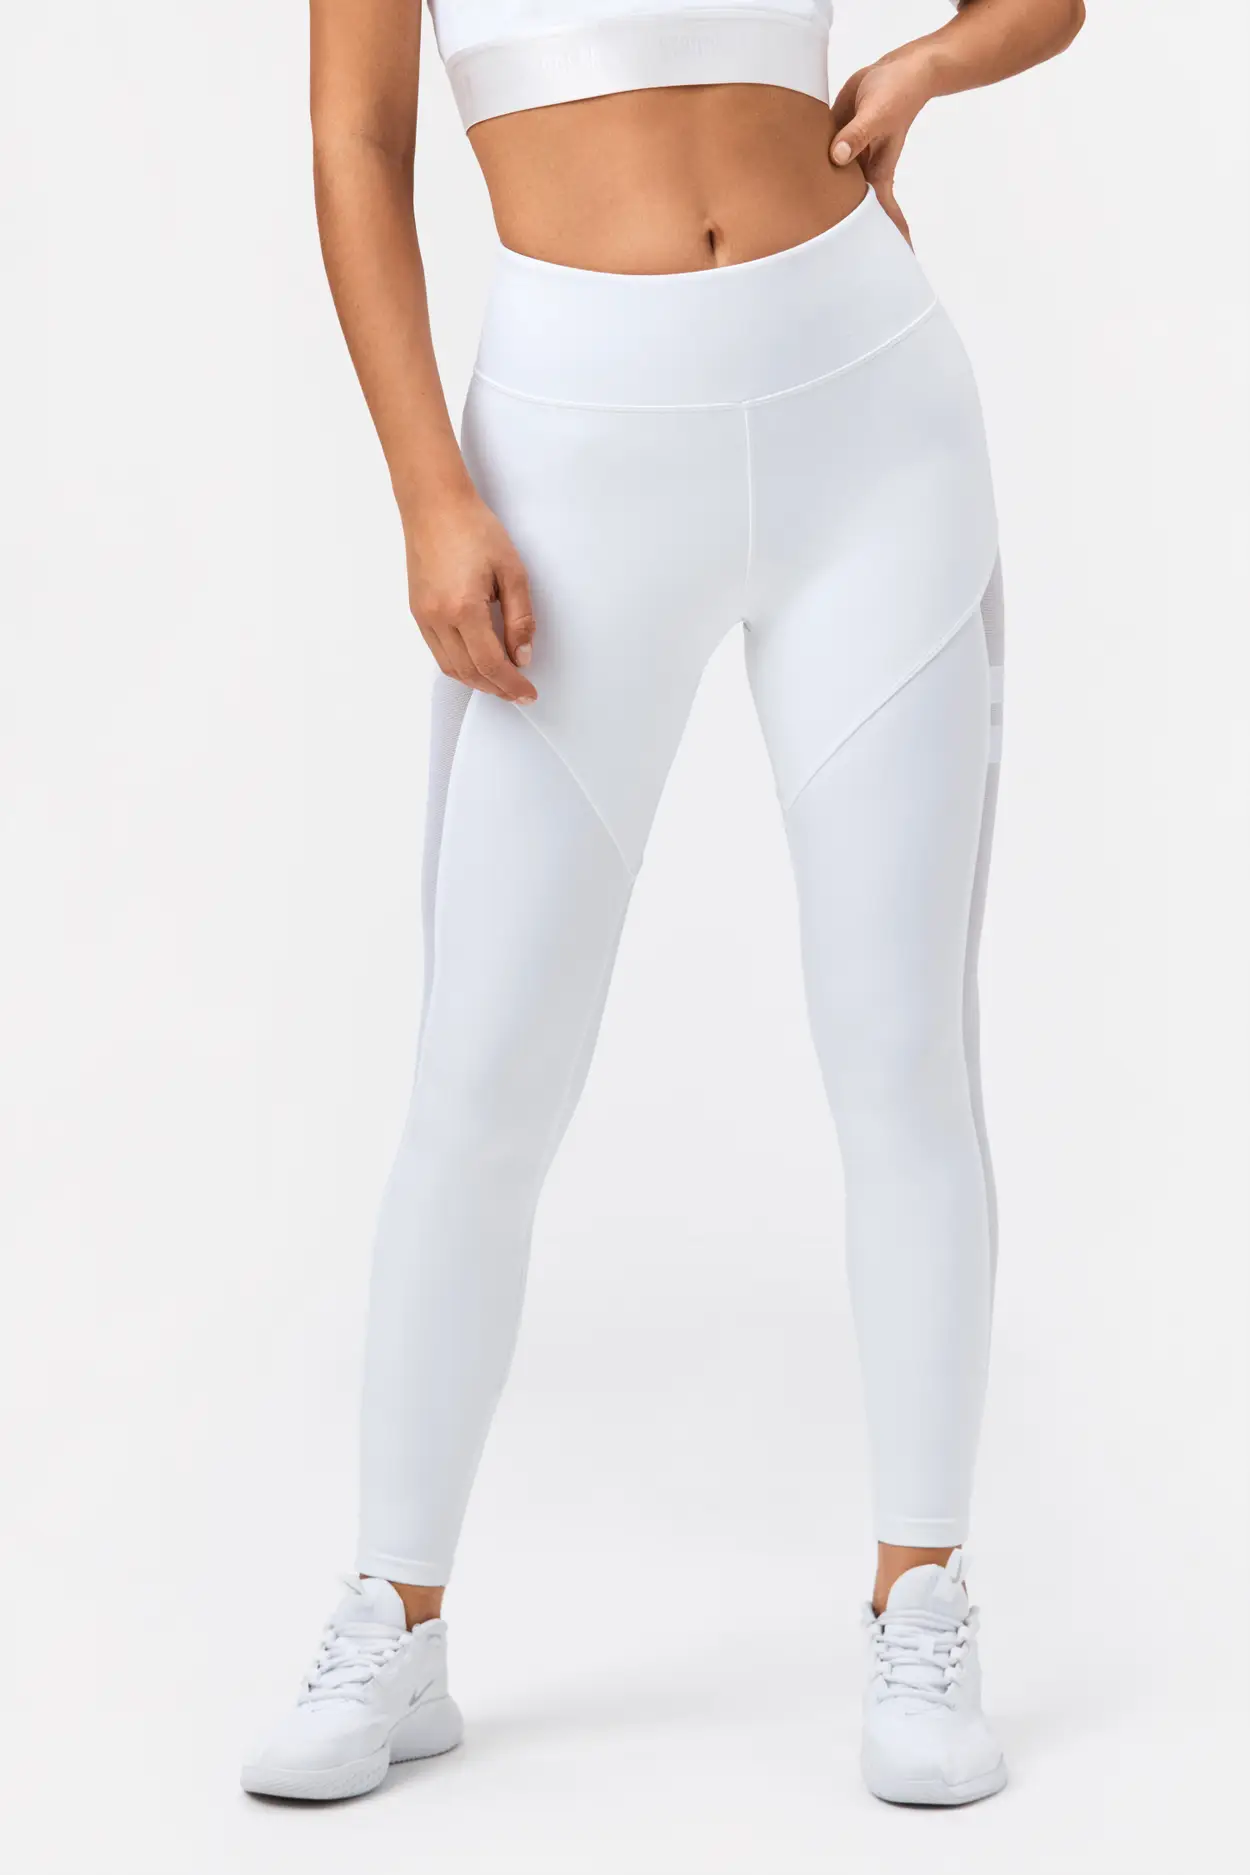 Zenergy by Chico's Solid White Leggings Size Med (1) - 60% off